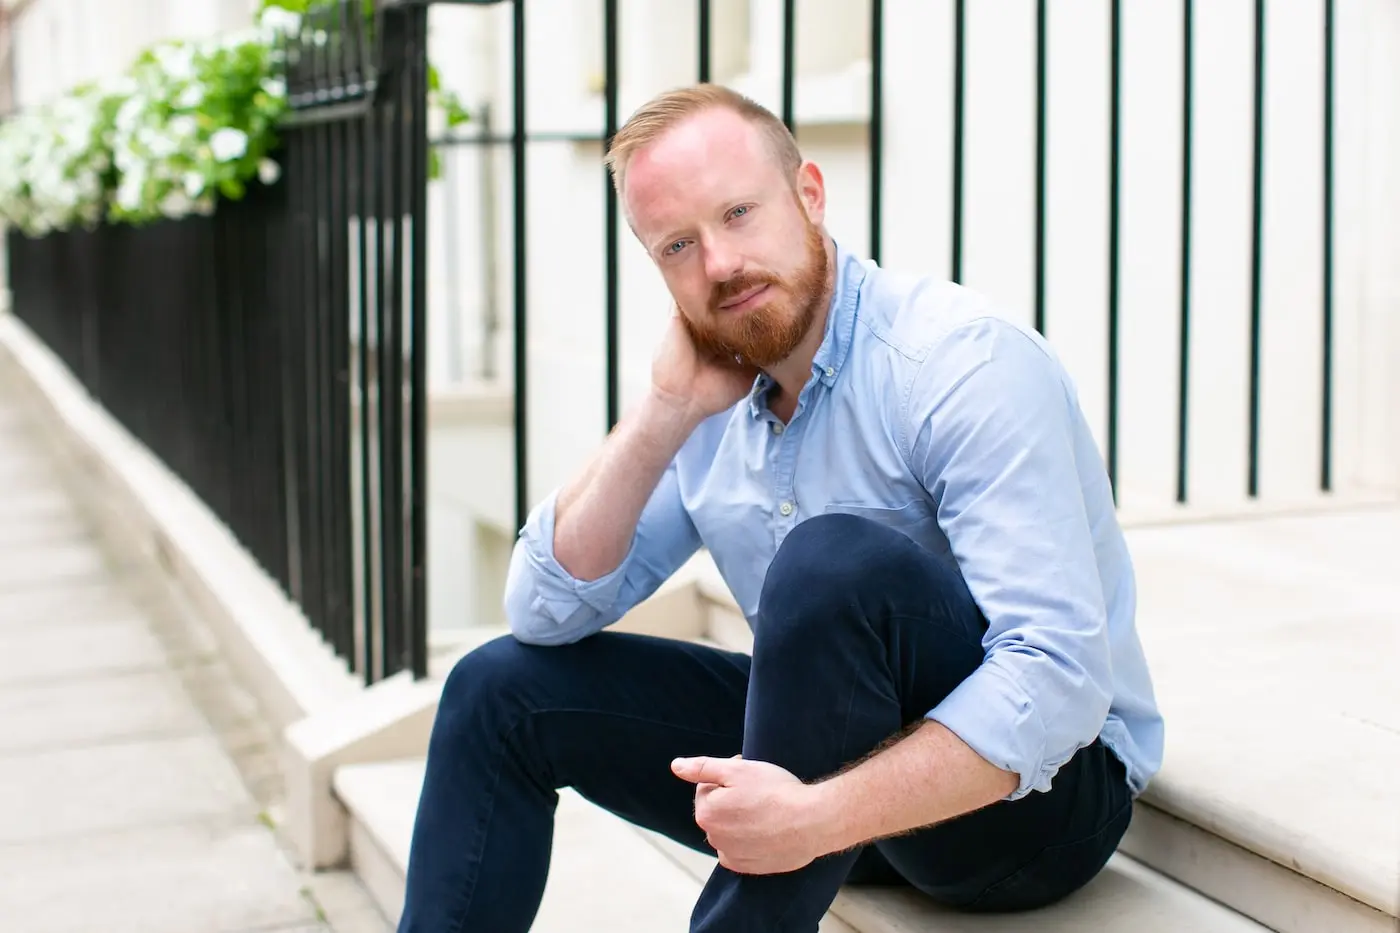 Daniel O'Shaughnessy wearing a blue shirt and jeans pictured sitting on a step.